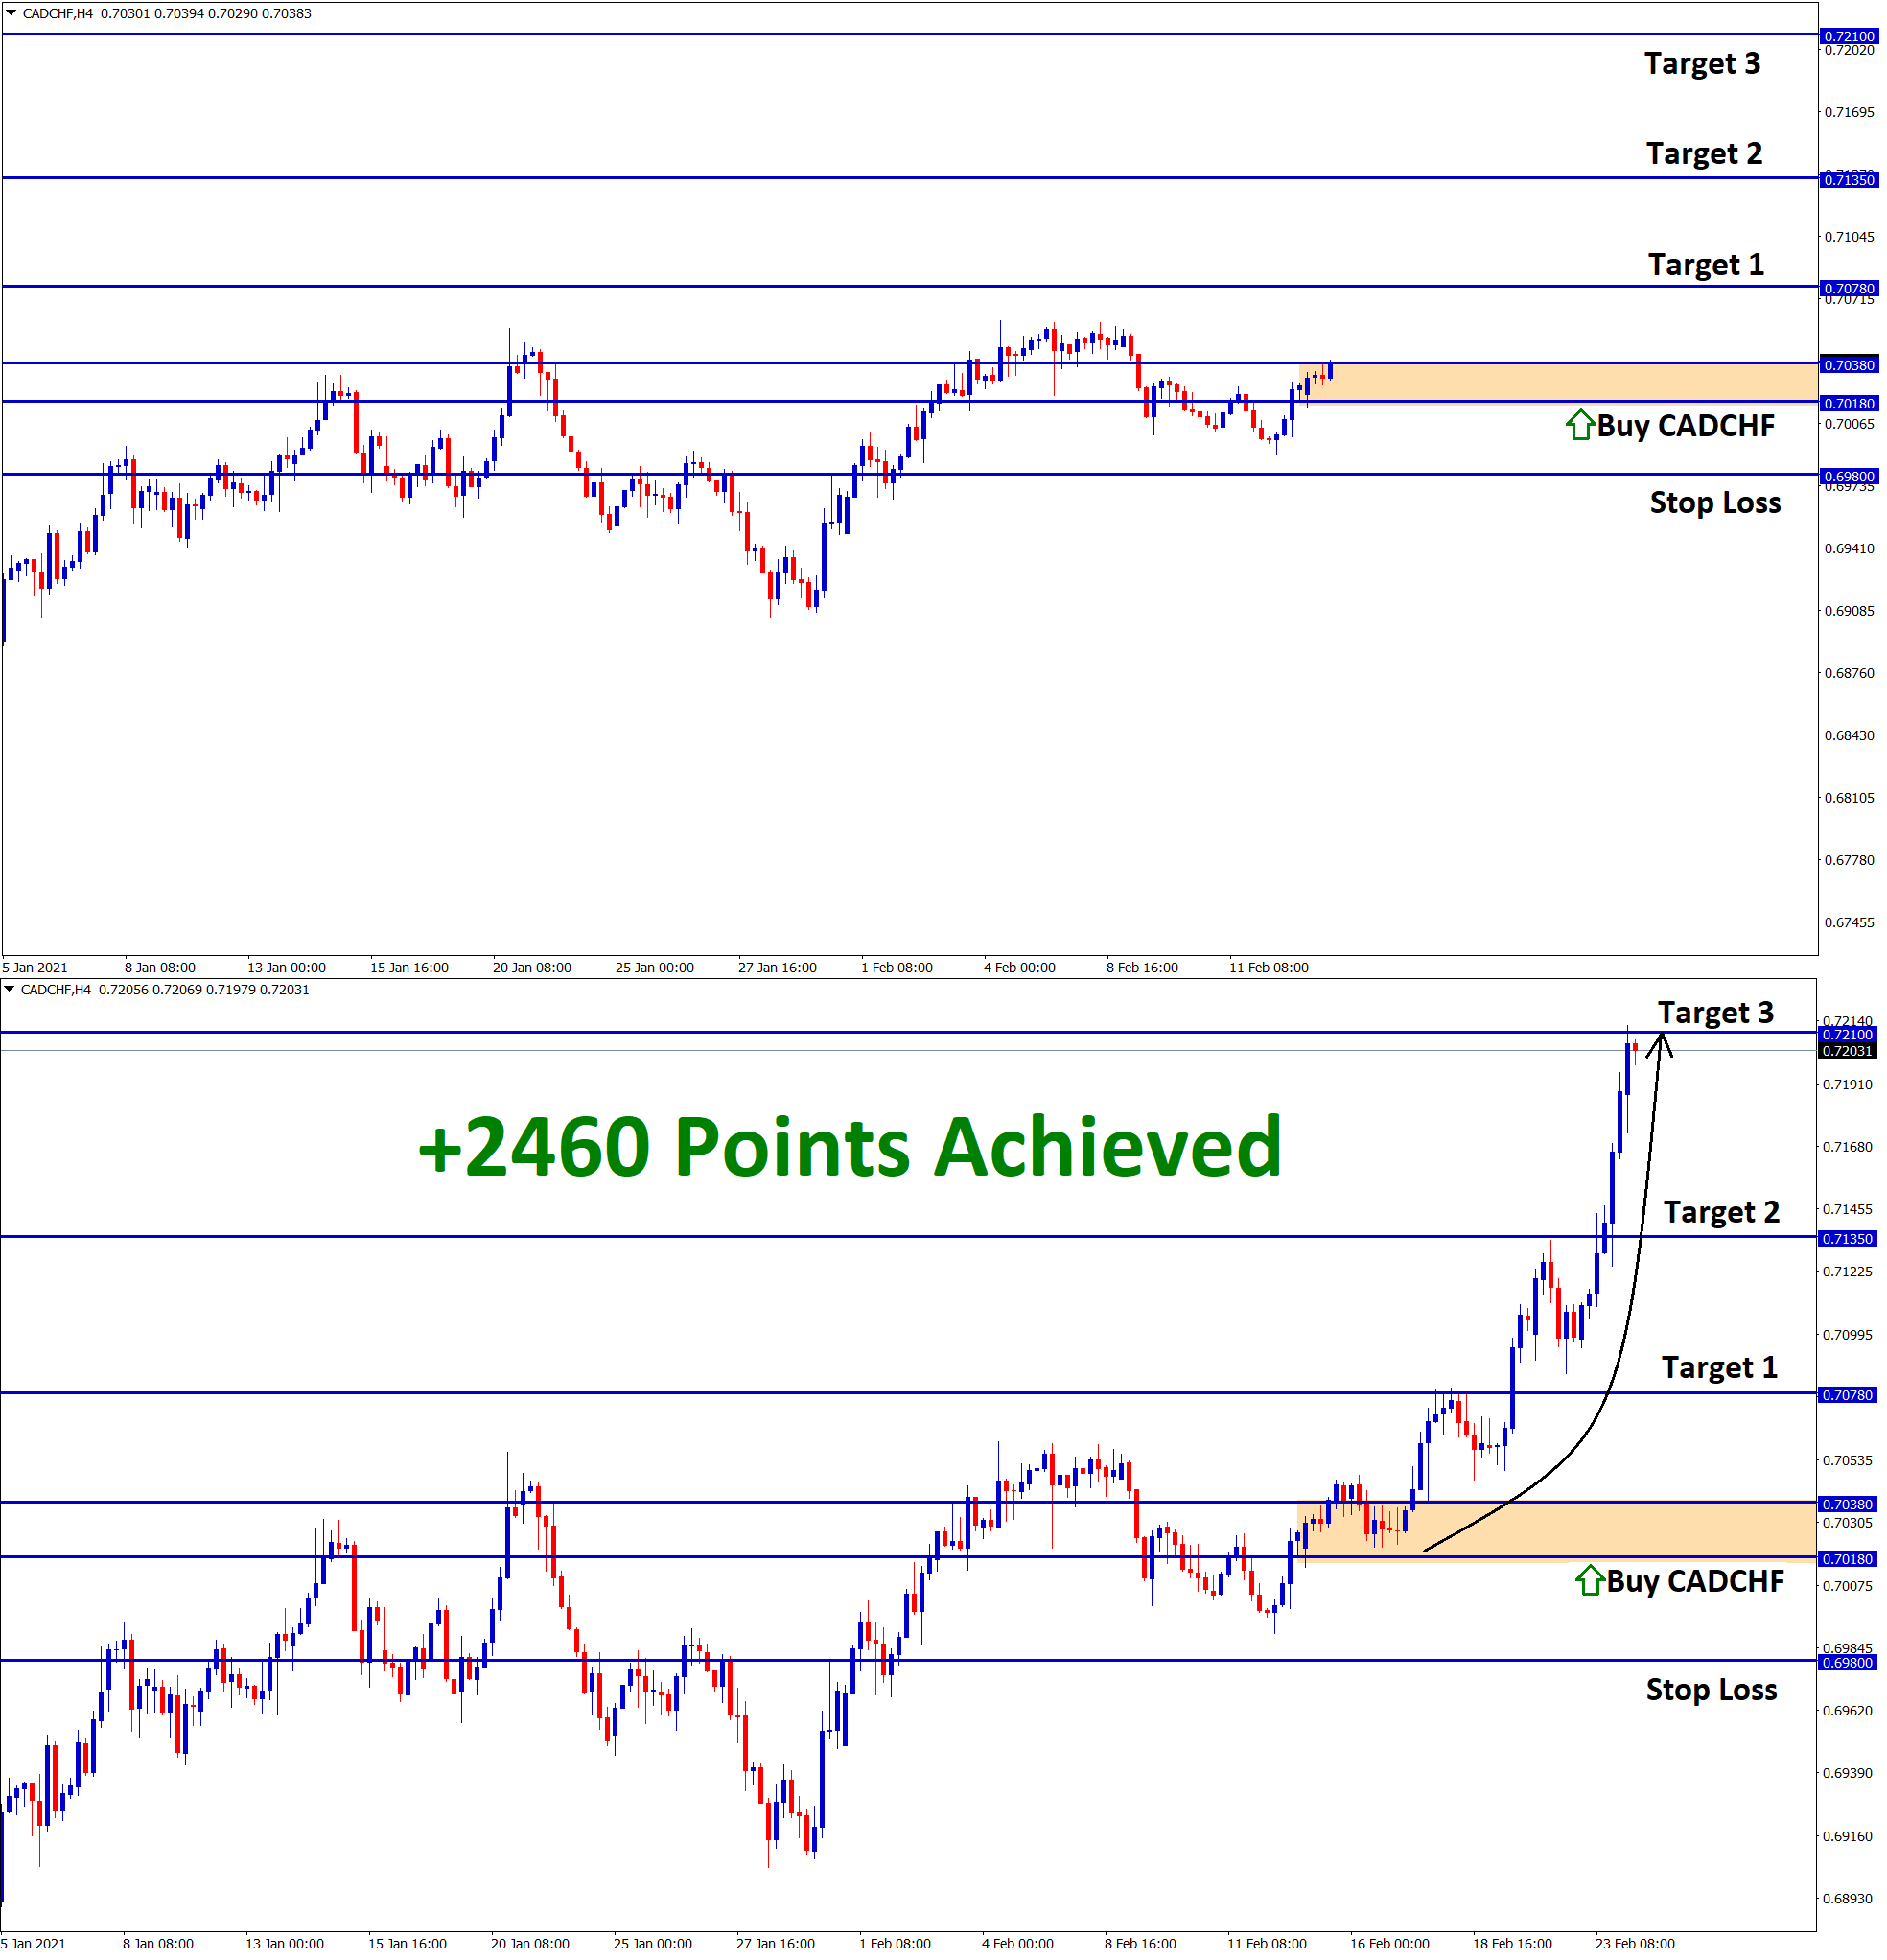 2460 Points Achieved in CADCHF T3